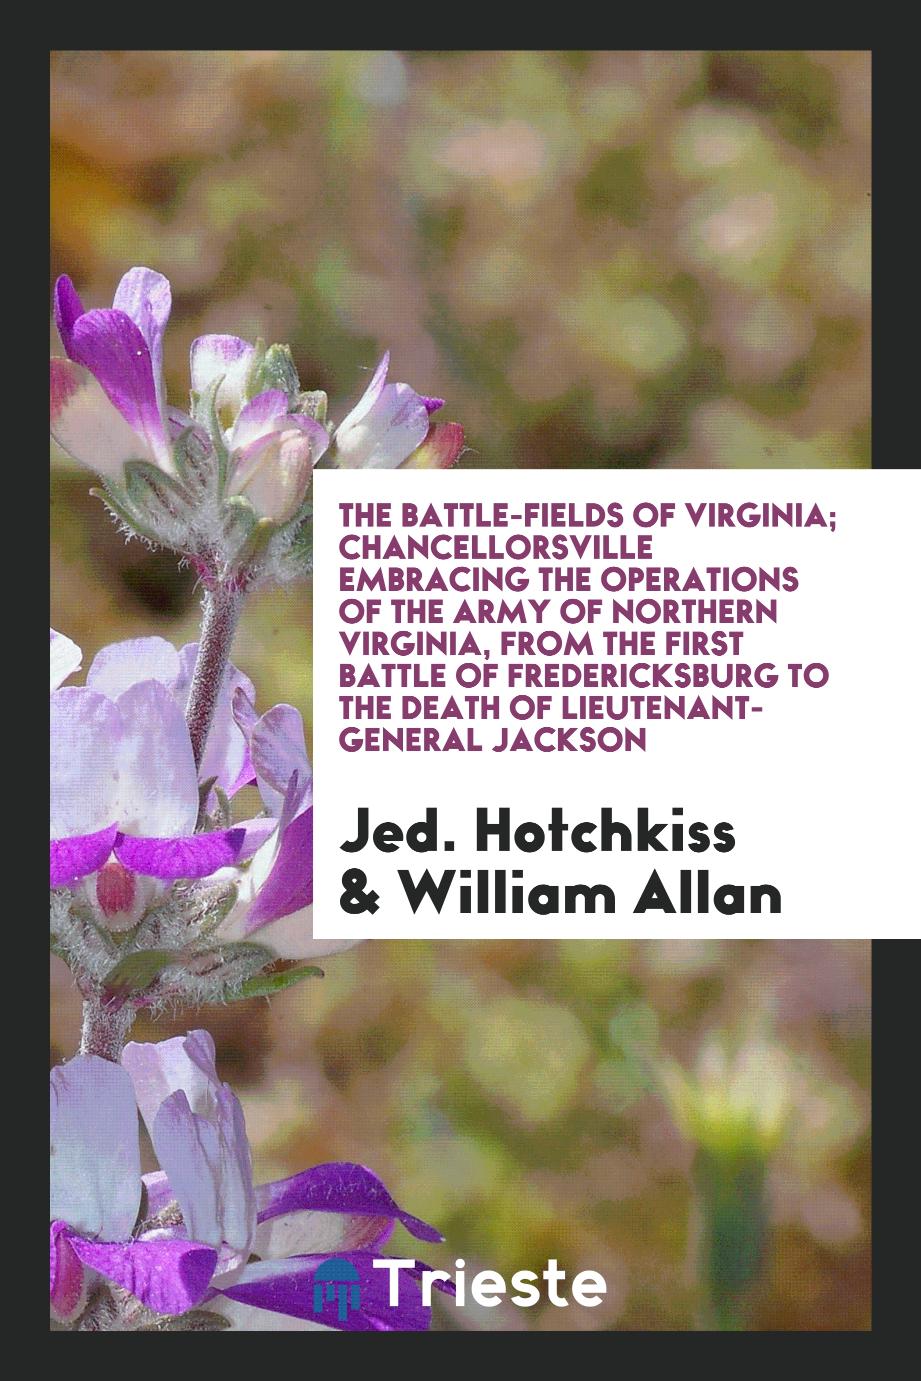 The Battle-Fields of Virginia; Chancellorsville Embracing the Operations of the Army of Northern Virginia, from the First Battle of Fredericksburg to the Death of Lieutenant-General Jackson